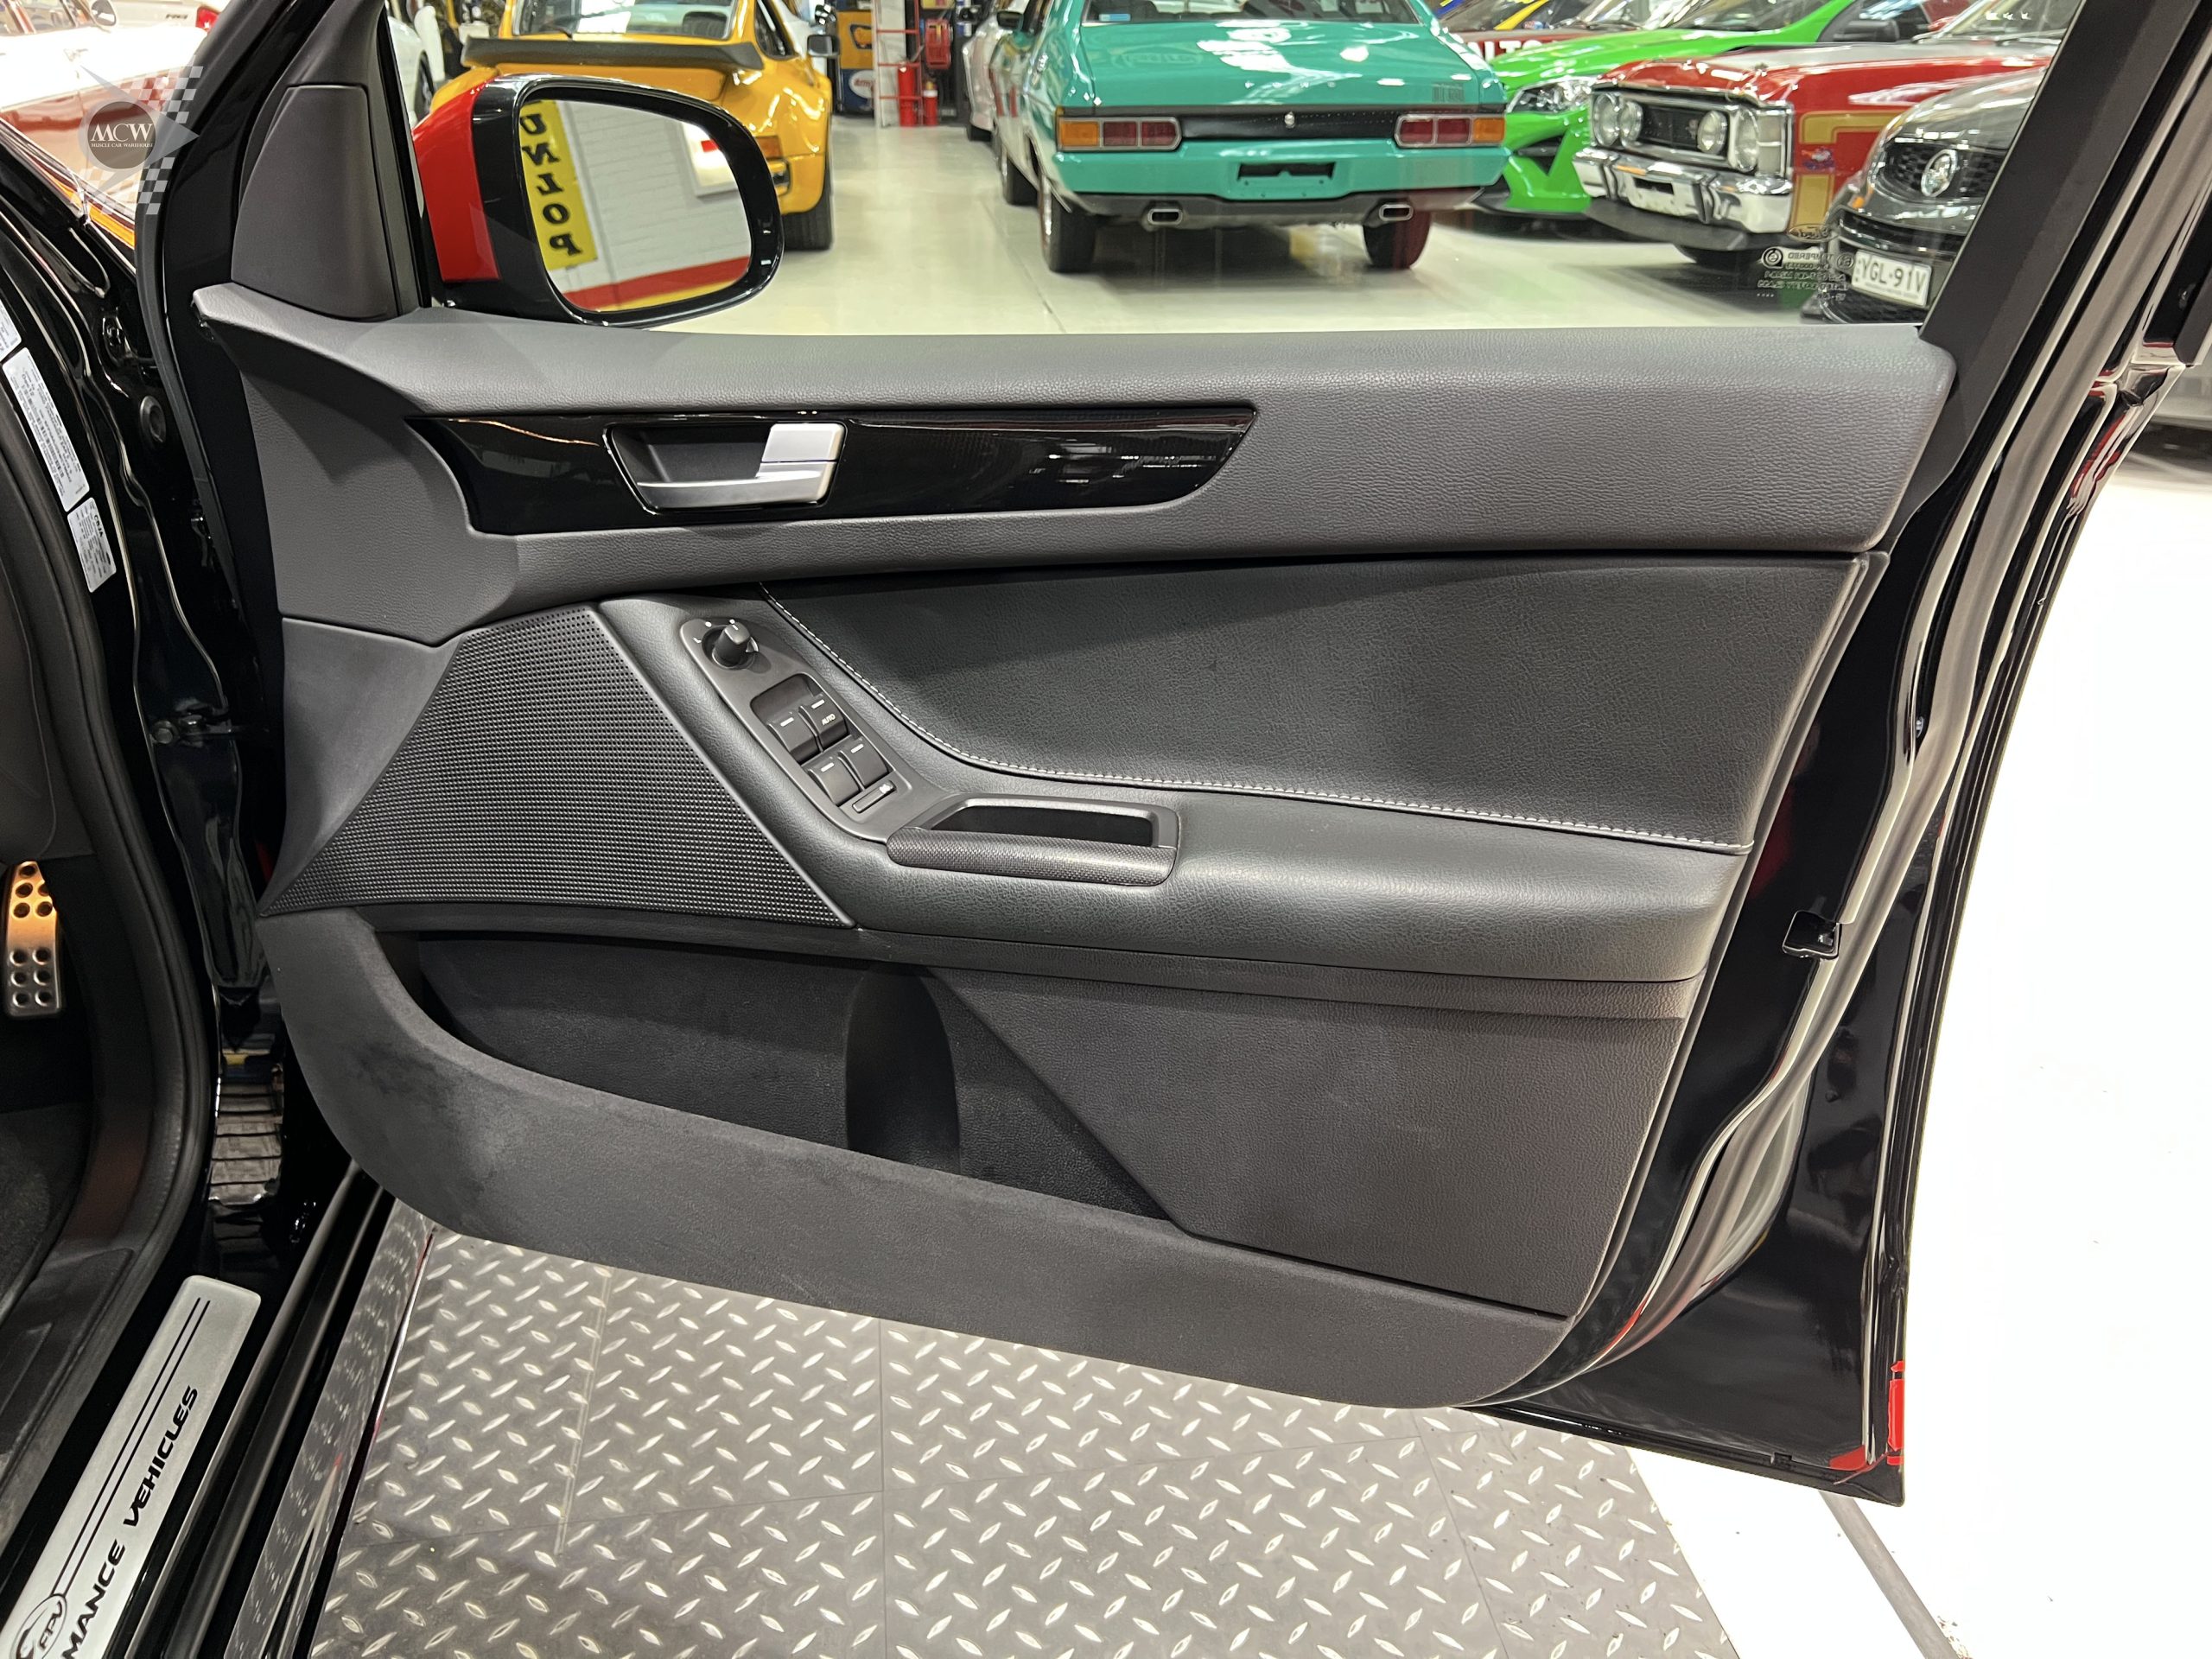 2012 Ford FG FPV GT R-Spec Door - Muscle Car Warehouse